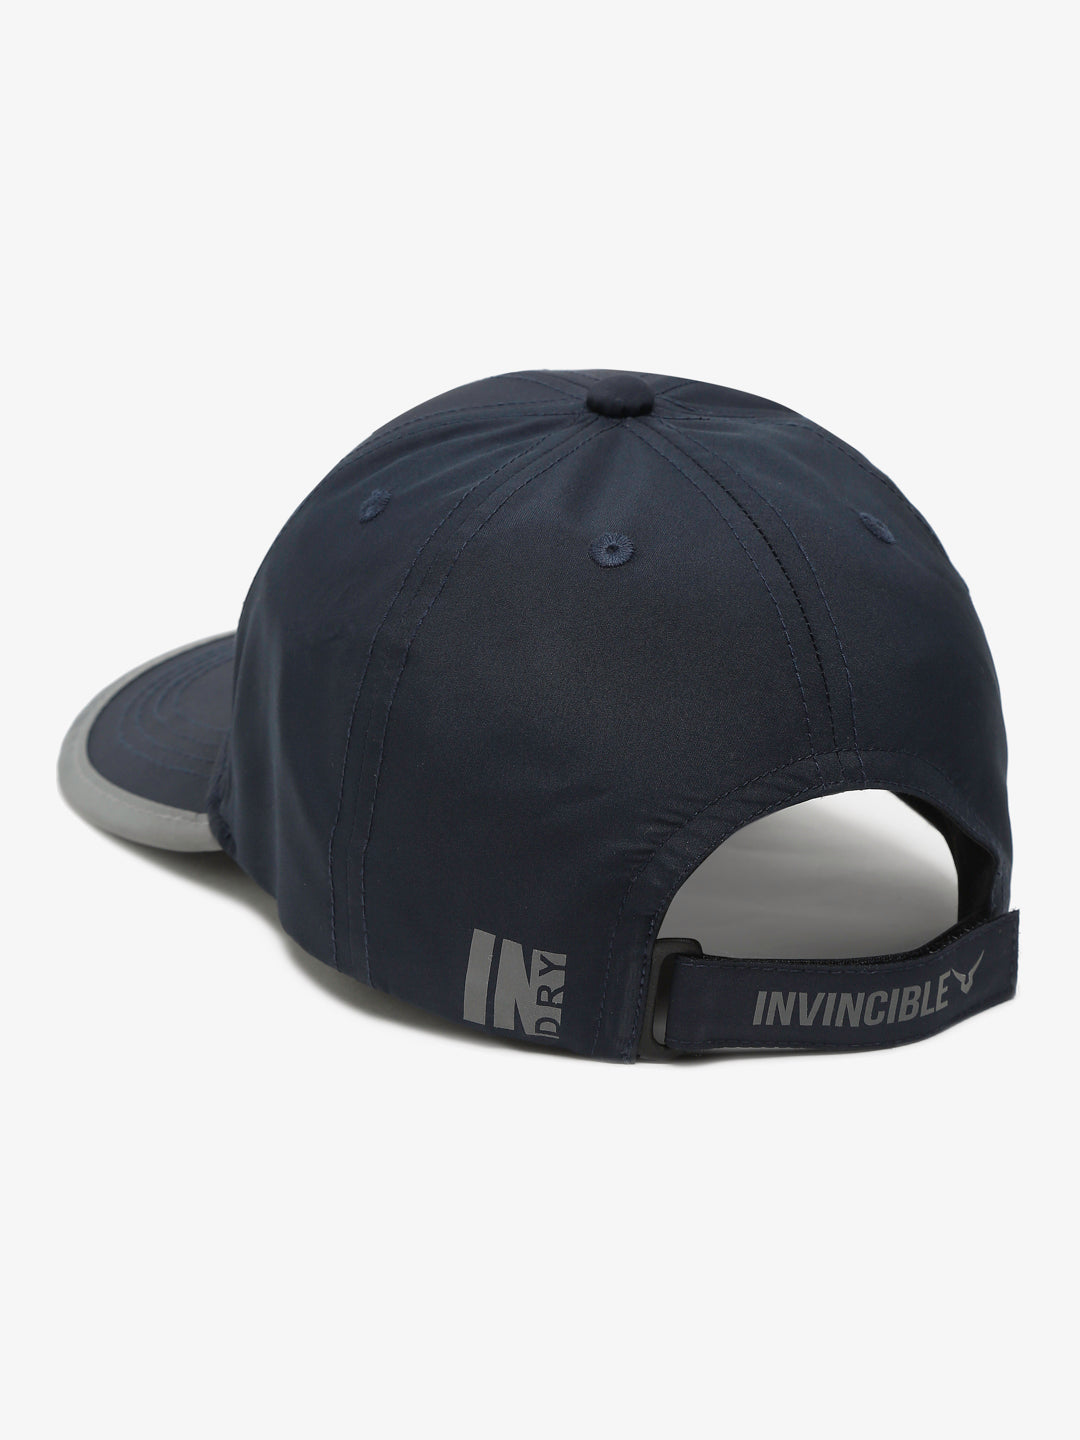 Invincible Unisex Quick Dry Light Weight Sports Caps